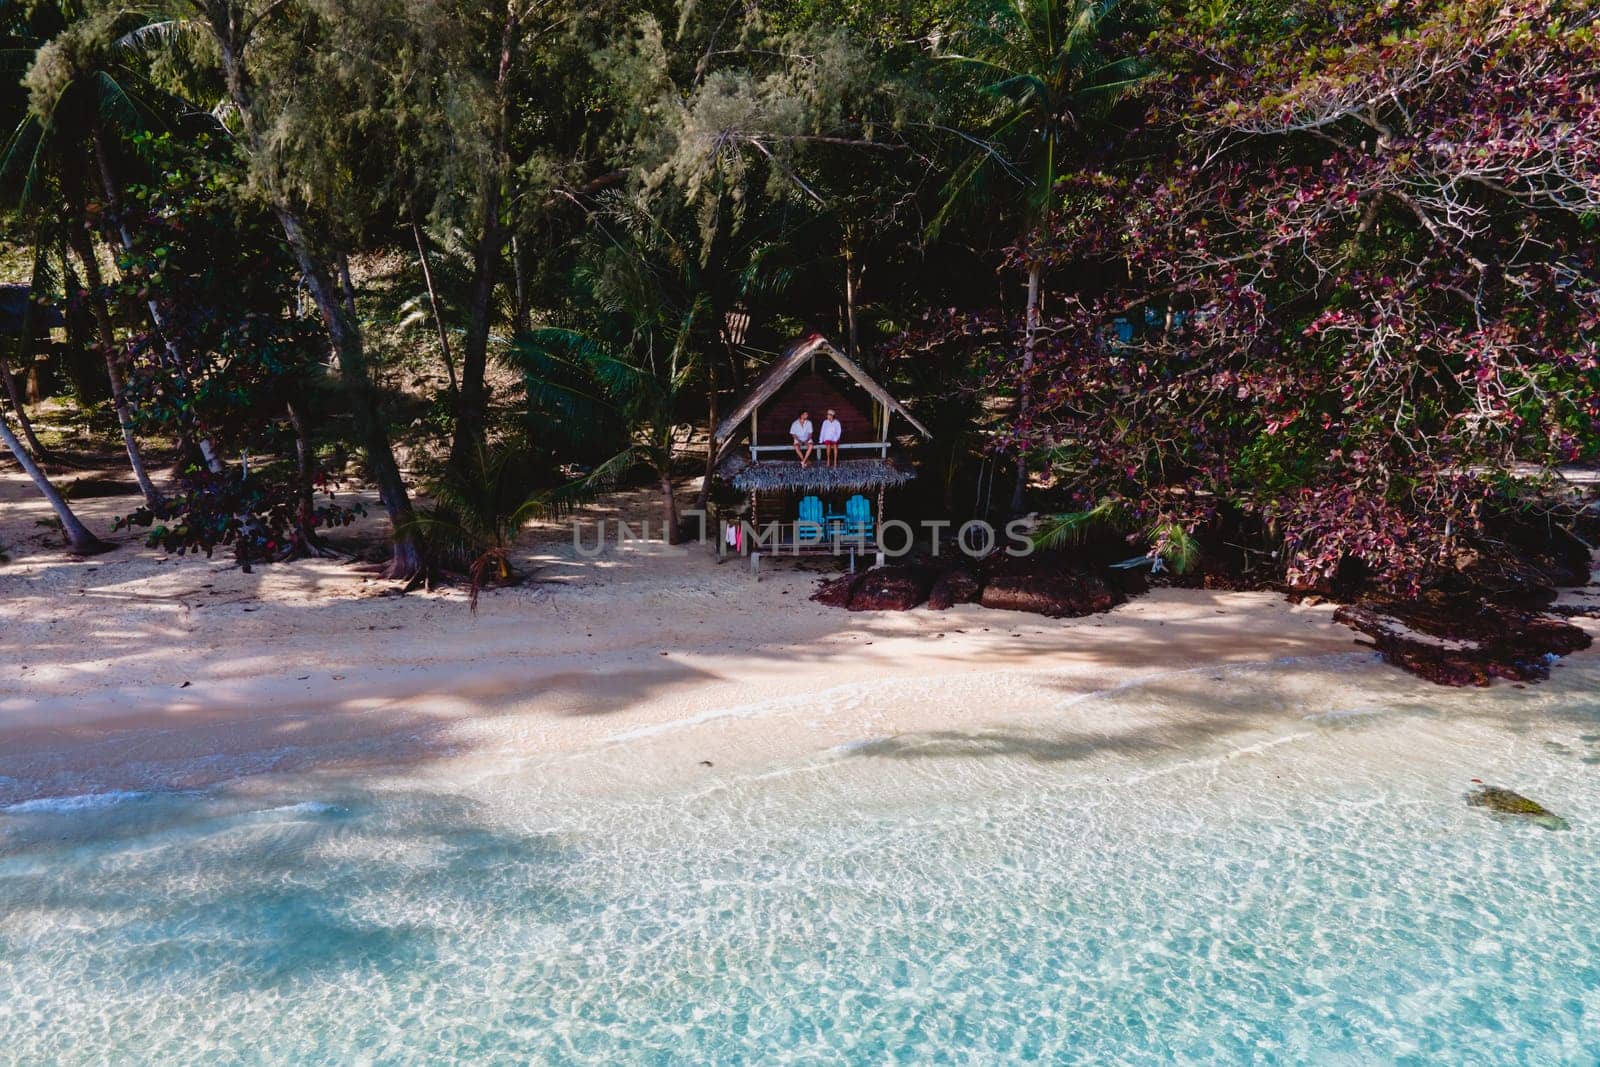 Koh Wai Island Trat Thailand. wooden bamboo hut bungalow on the beach. a young couple of men and woman on a tropical Island in Thailand